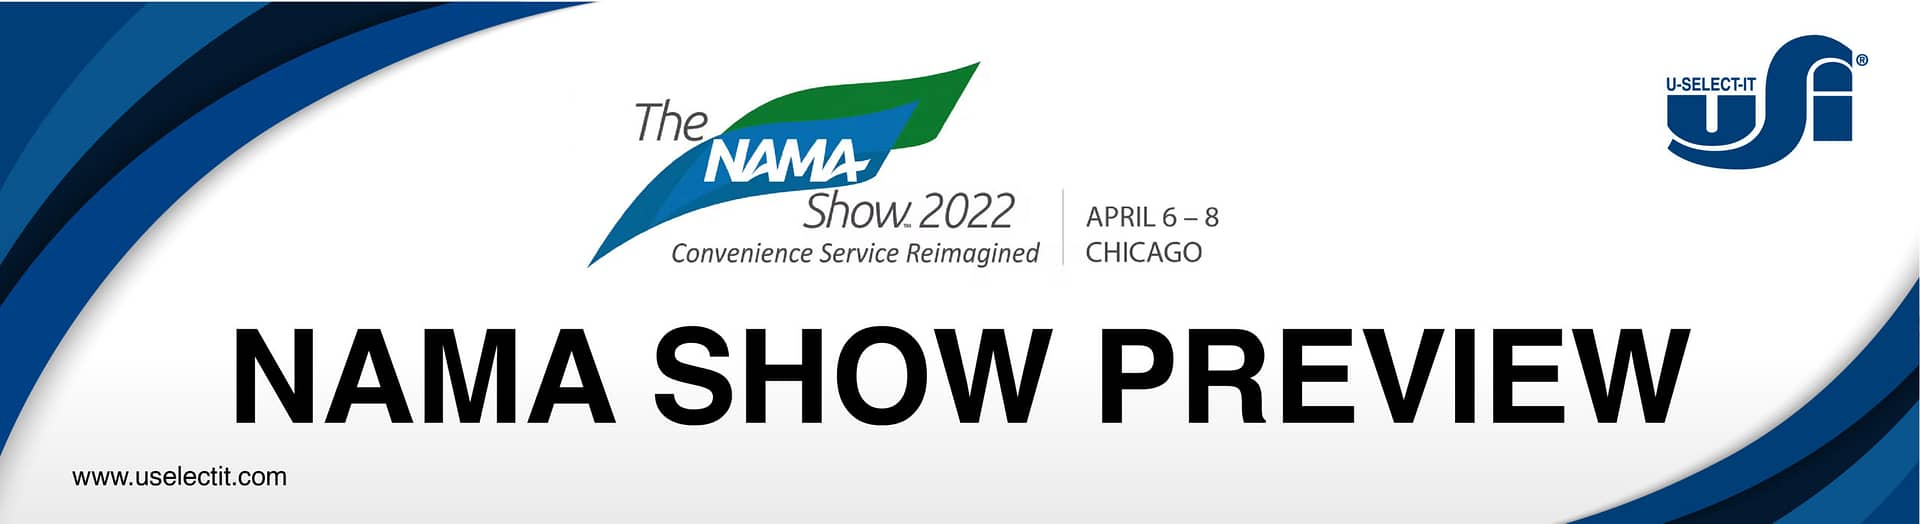 The NAMA Show Preview 2022 USelectIt